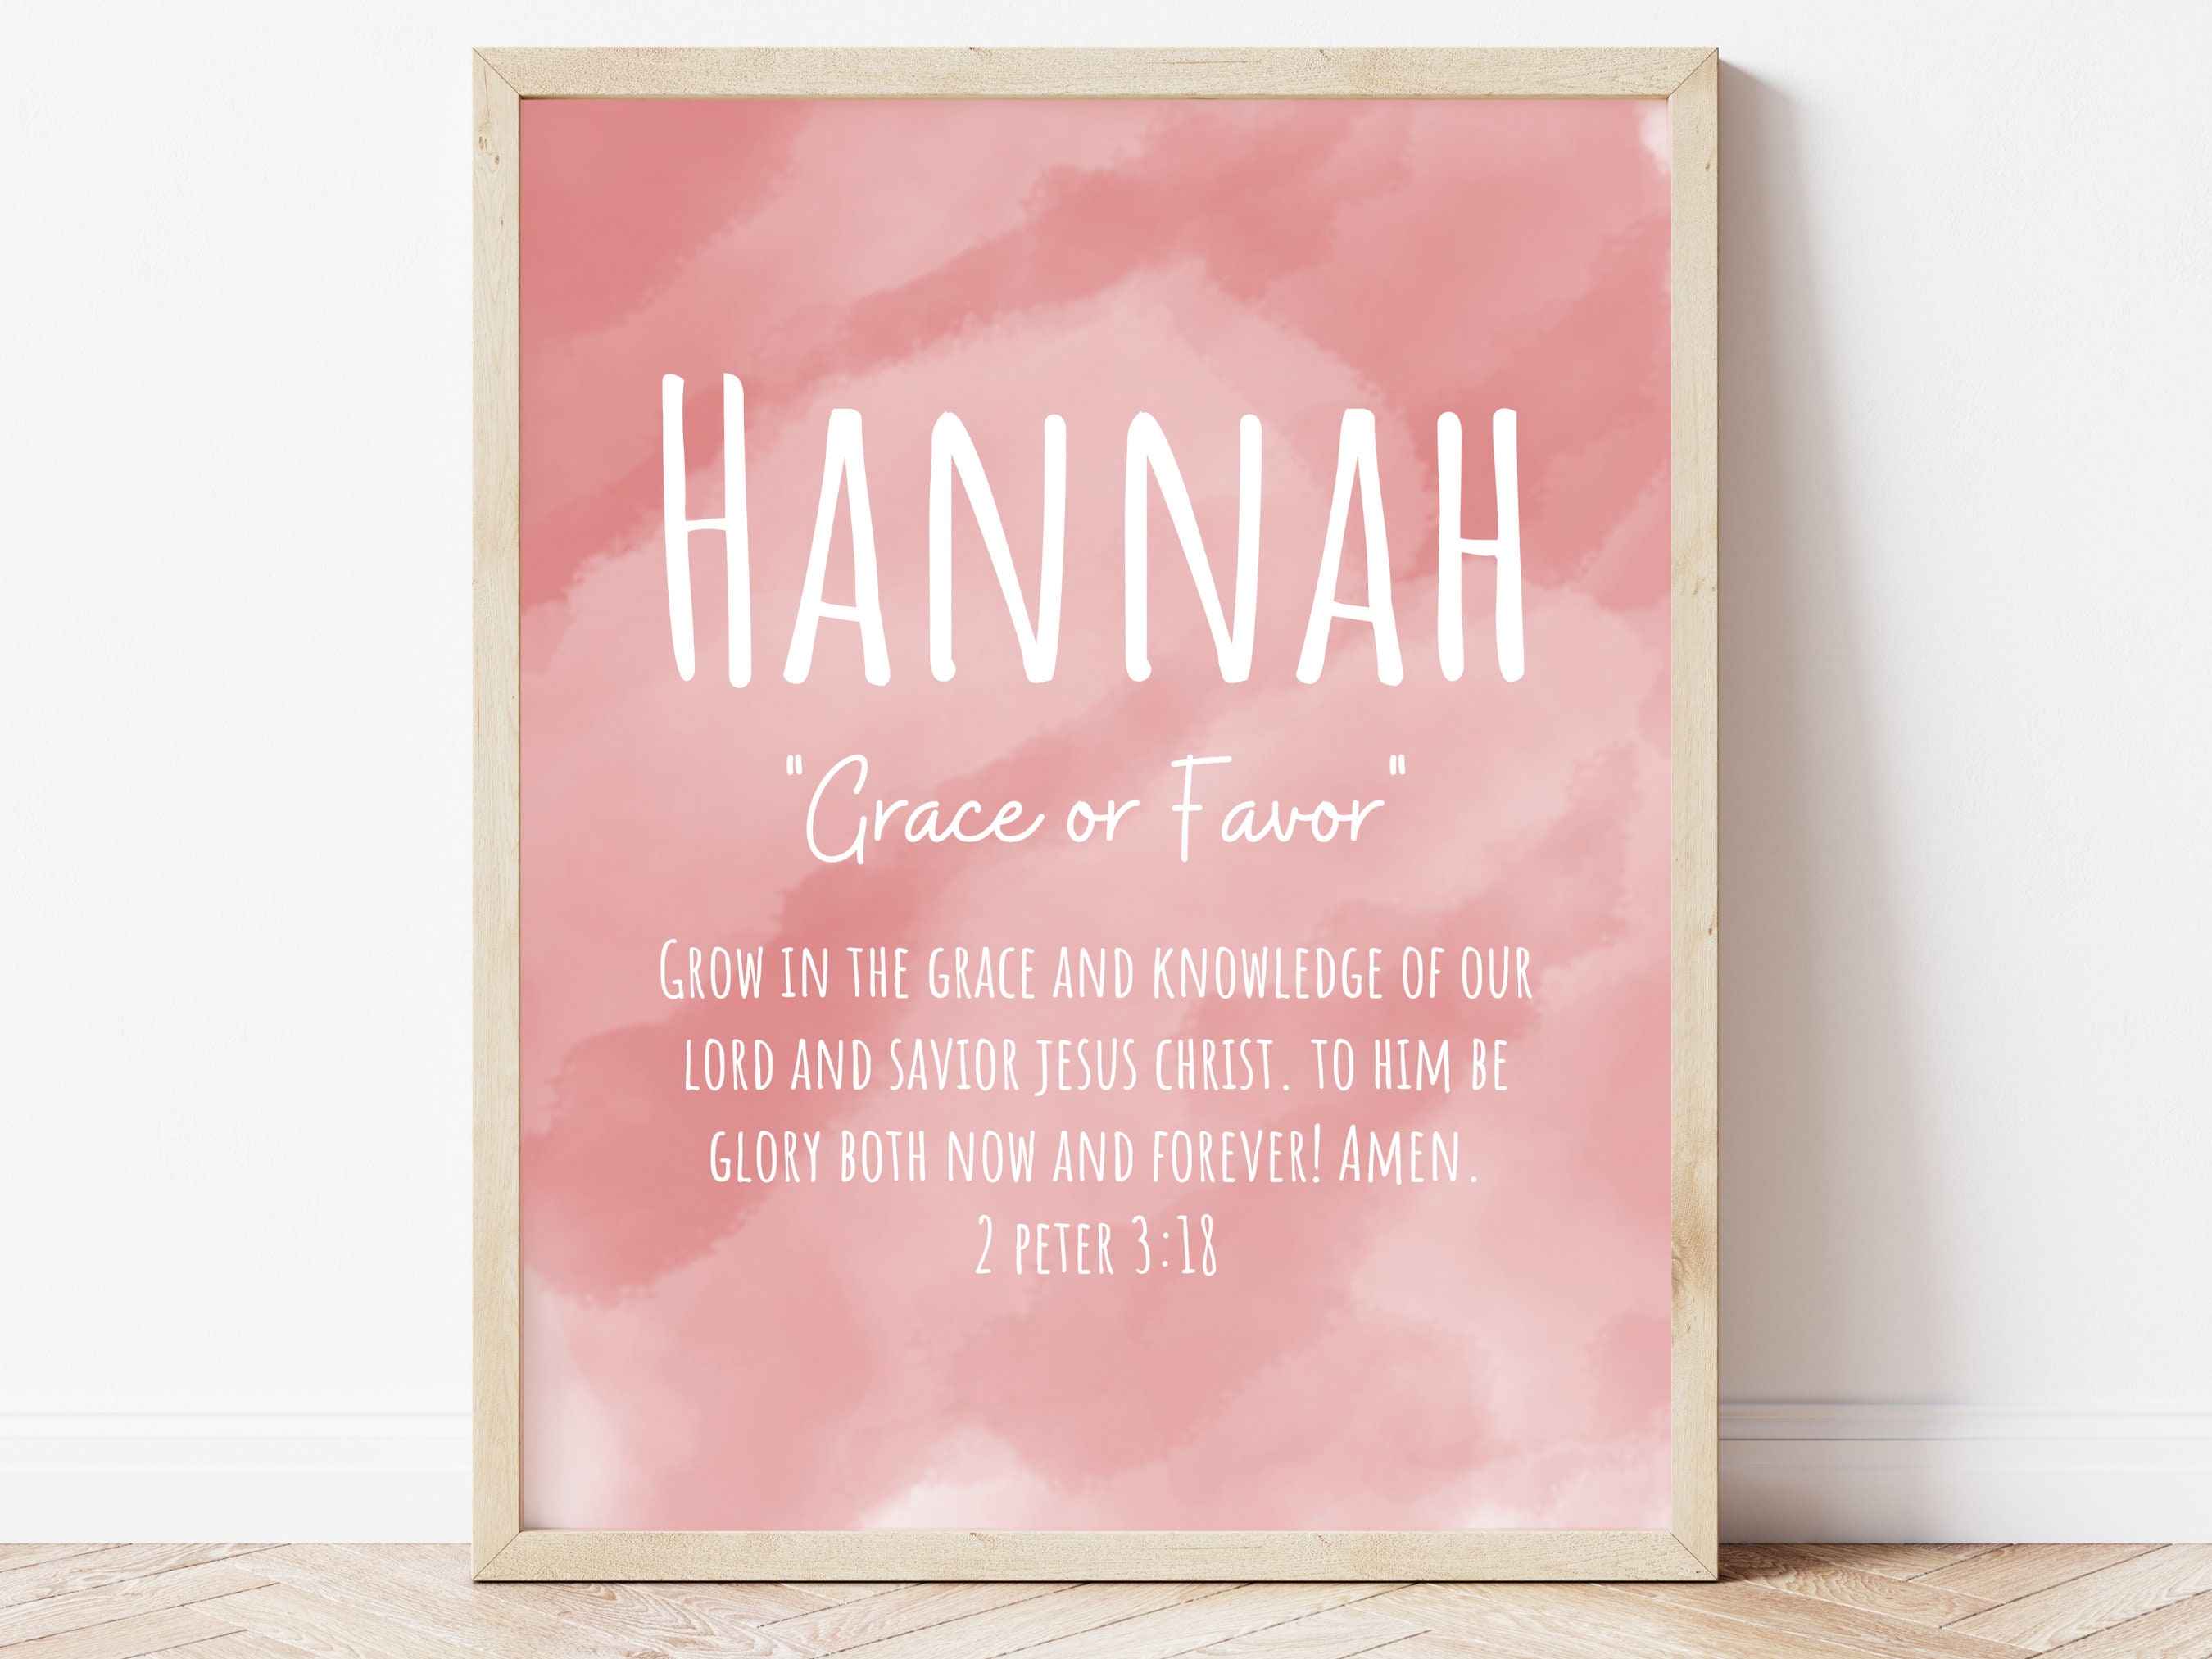 Name Meaning Print Biblical Name Meaning Sign Baby Name 